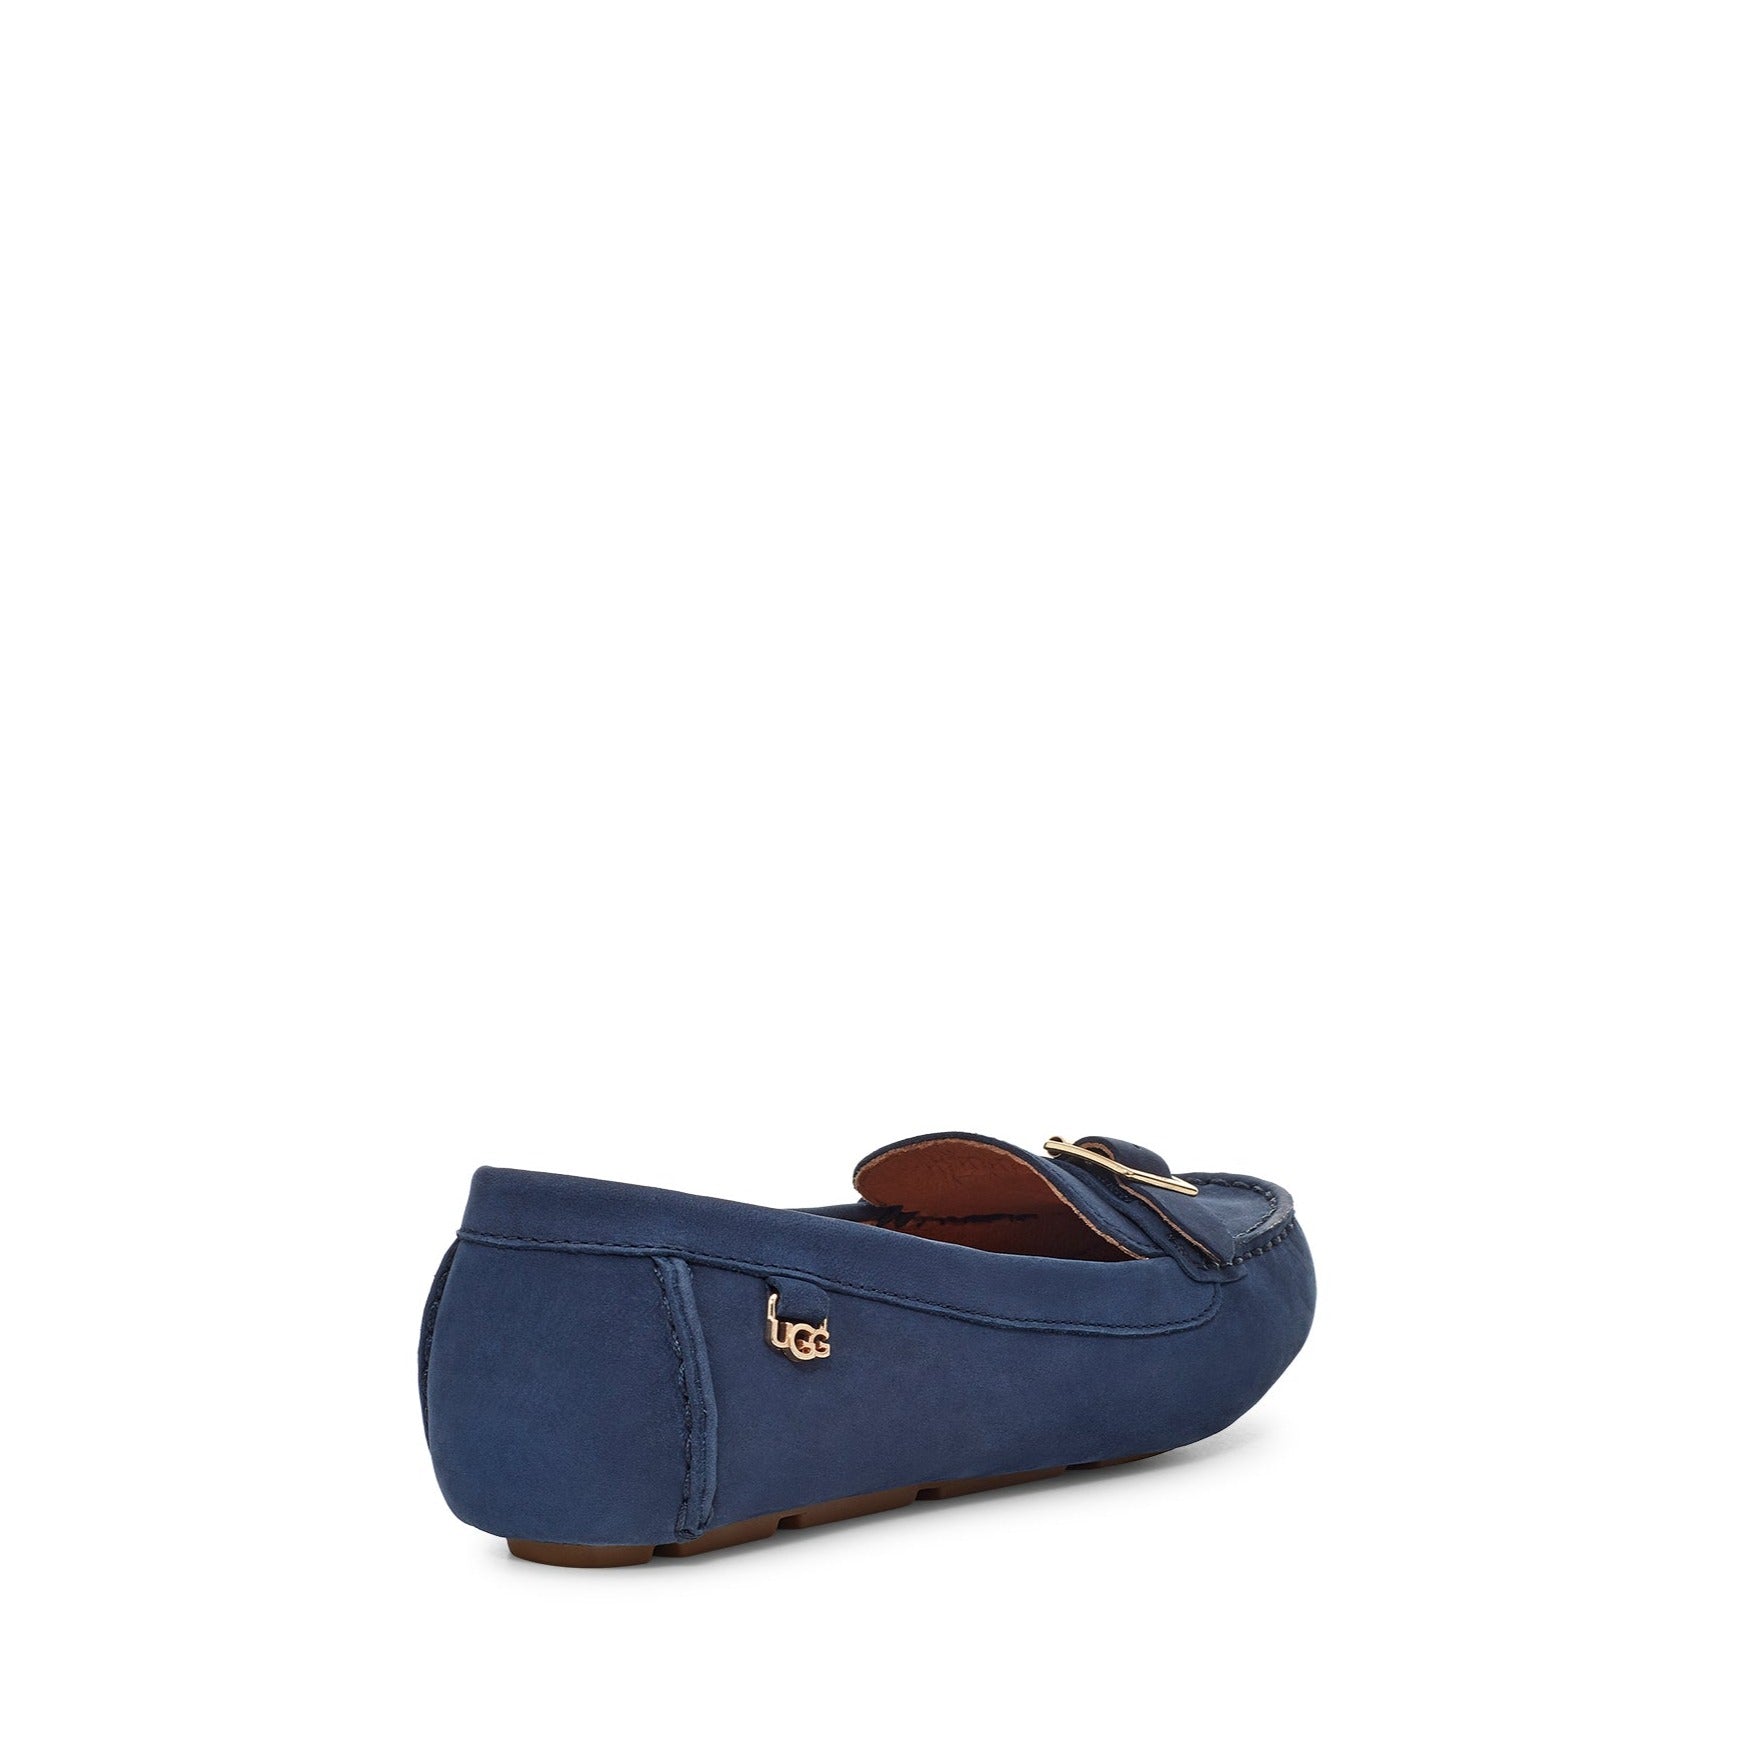 Sample UGG Lassel Loafers & Laceups   